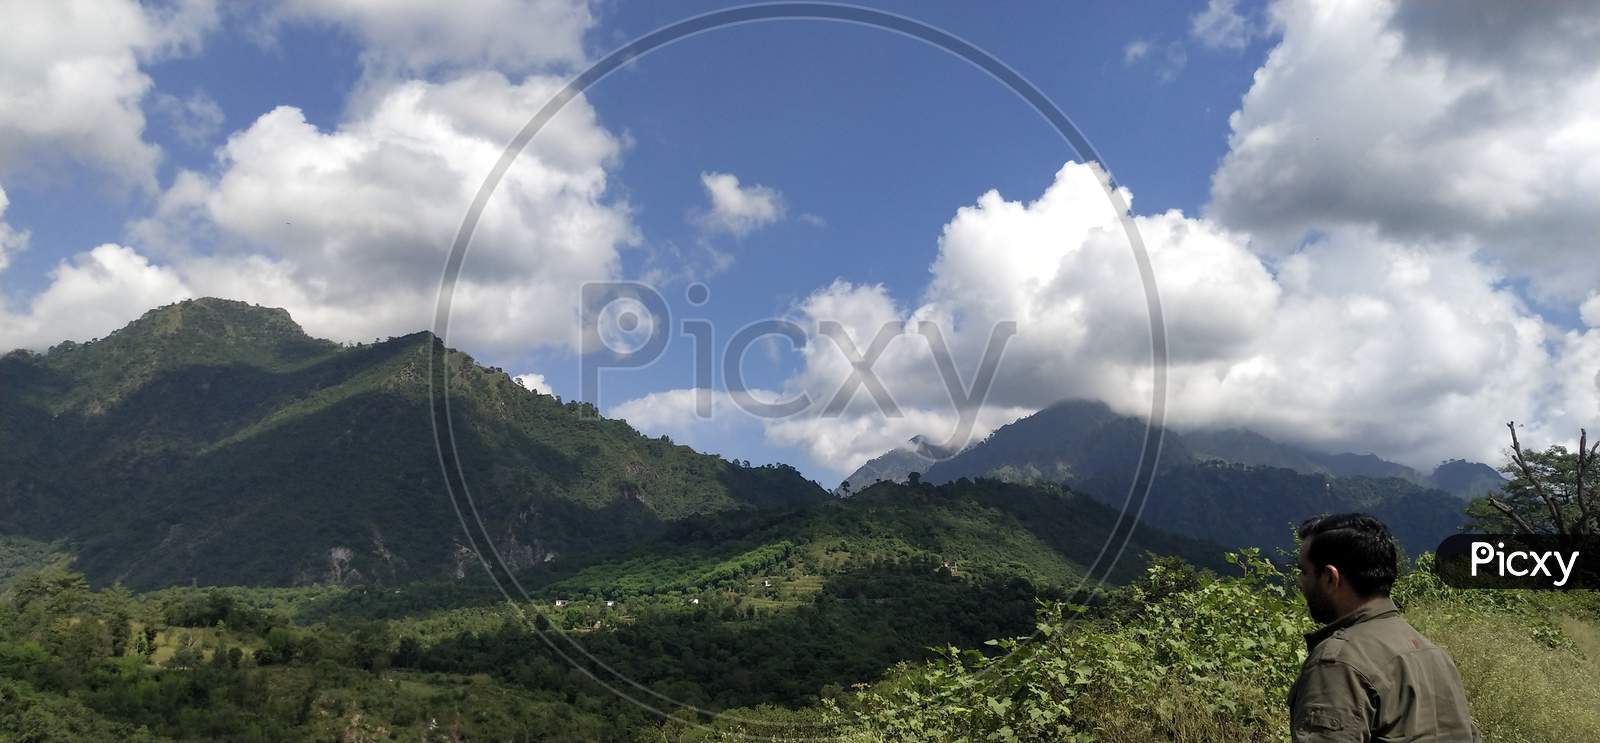 Green mountains landscape with coluds and blue sky